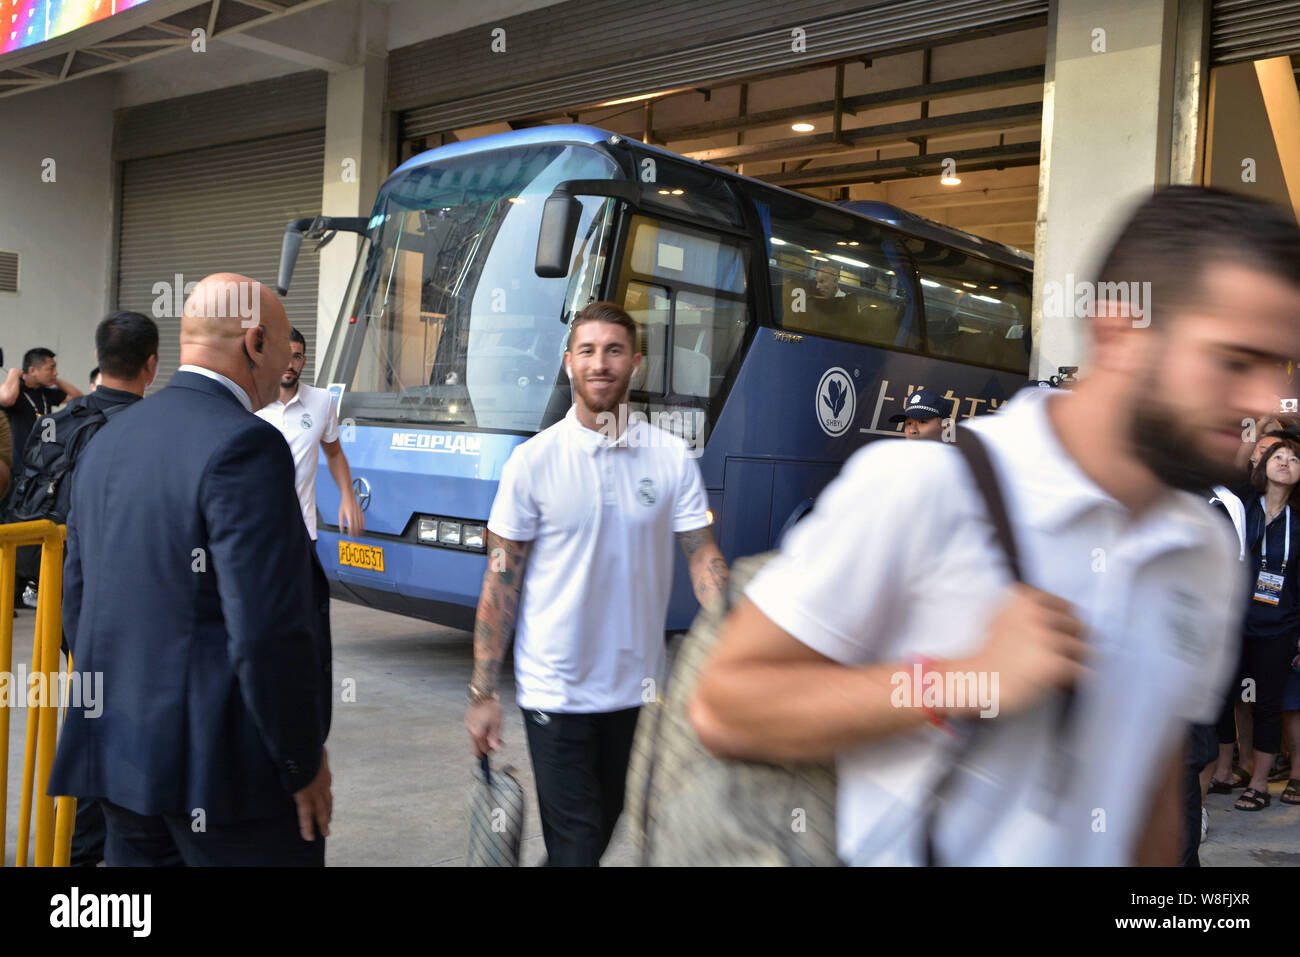 Sergio Ramos, center, and teammates of Real Madrid arrive at the Shanghai Stadium before a friendly soccer match against AC Milan in Shanghai, China, Stock Photo